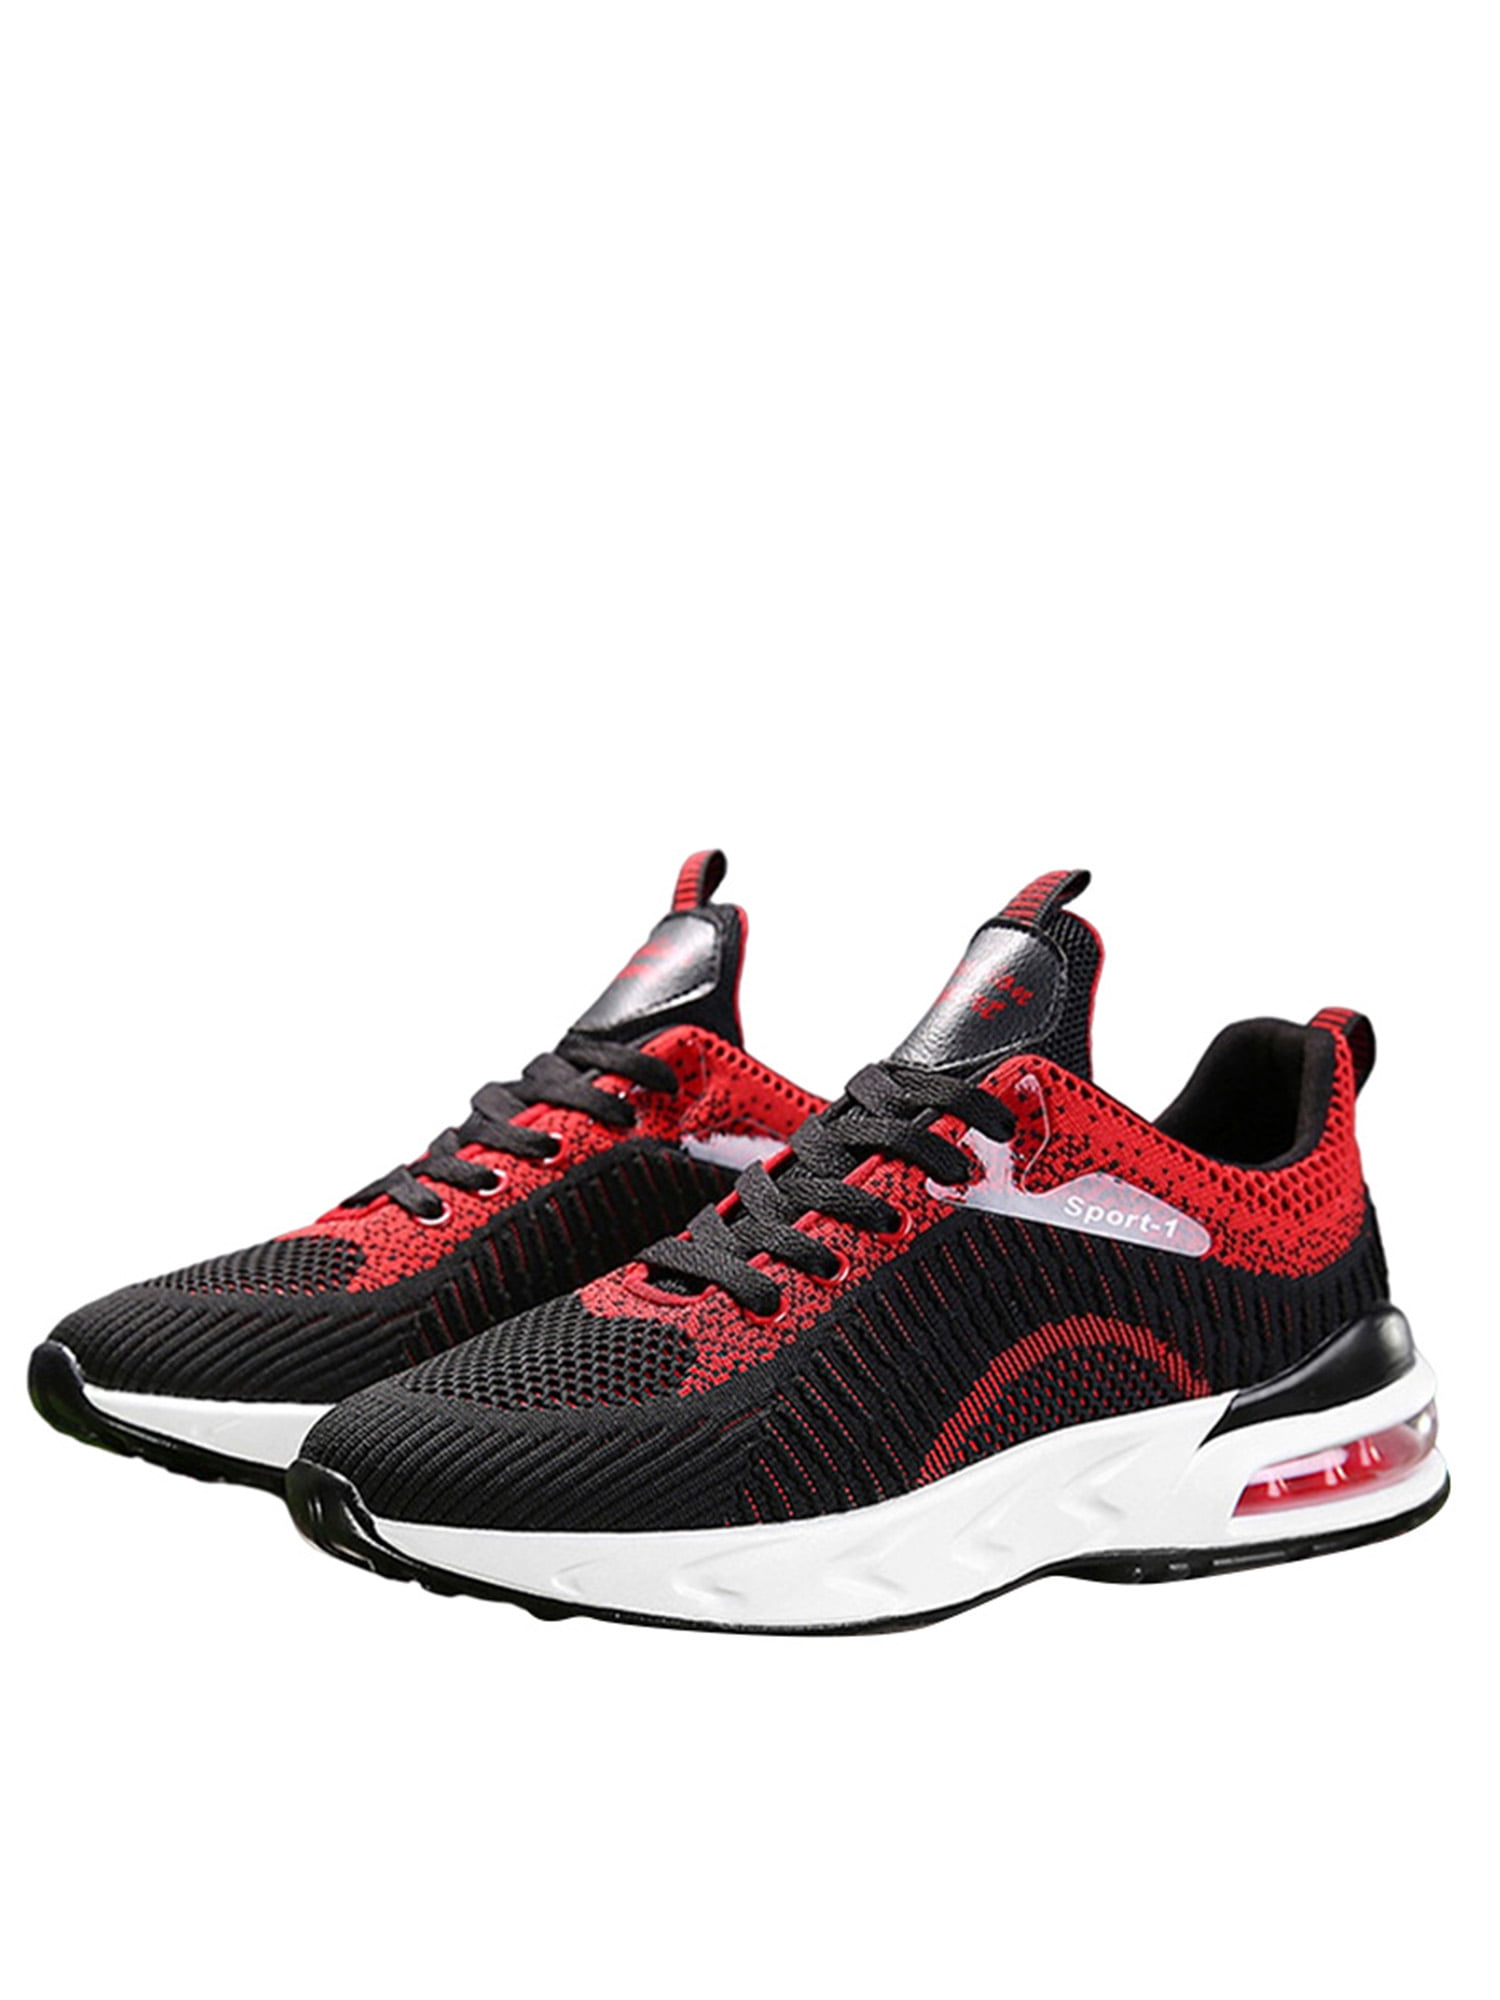 MENS RUNNING TRAINERS SHOCK ABSORBANT CASUAL WALKING RUNNING GYM SPORTS SHOES 